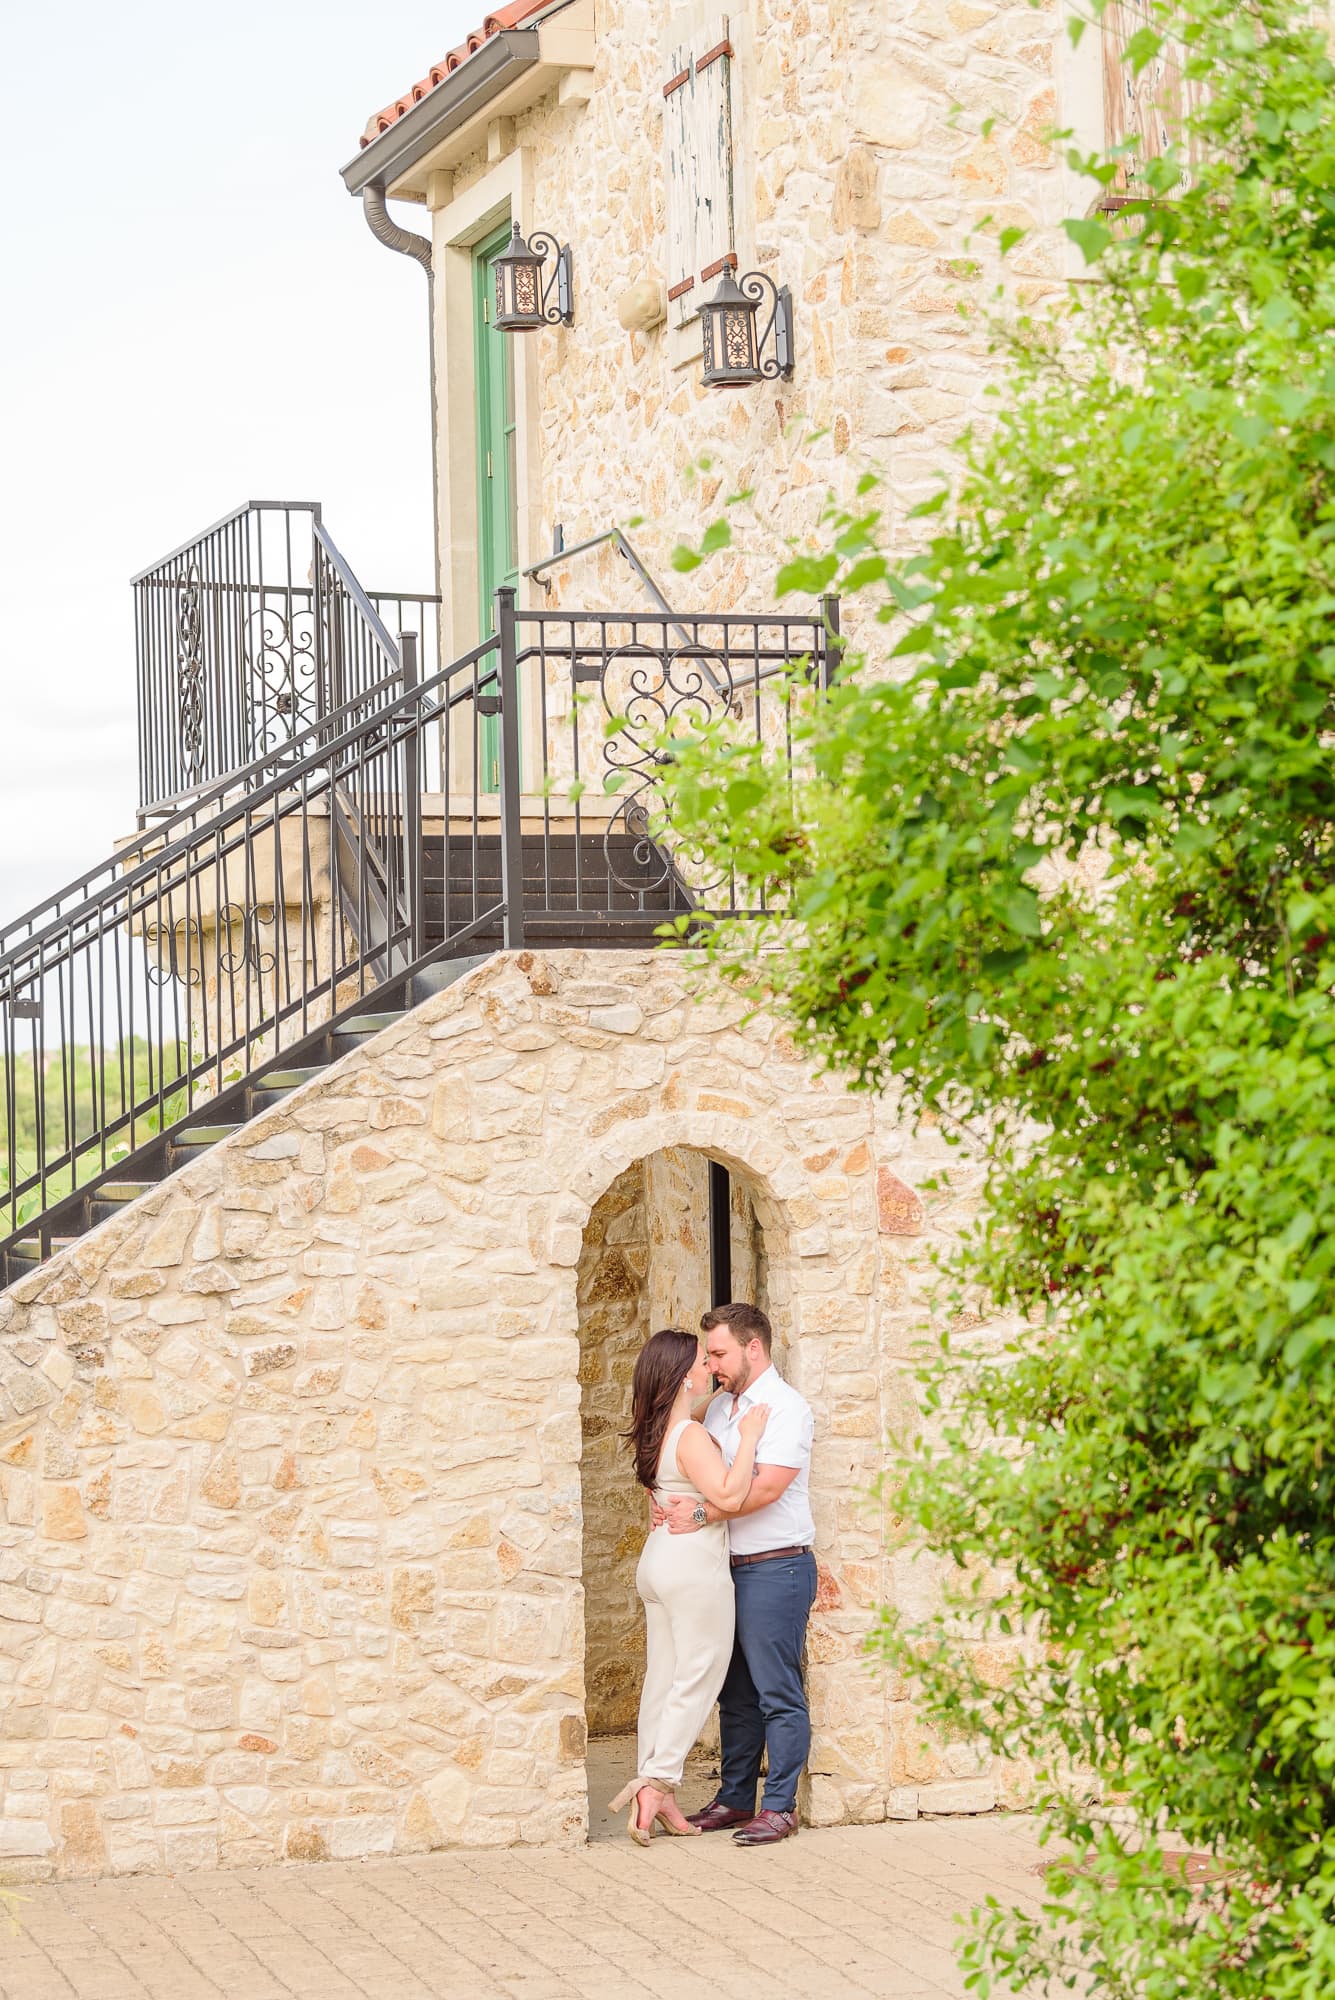 There is a European style building with an arch way and stone walls for this engagement session.